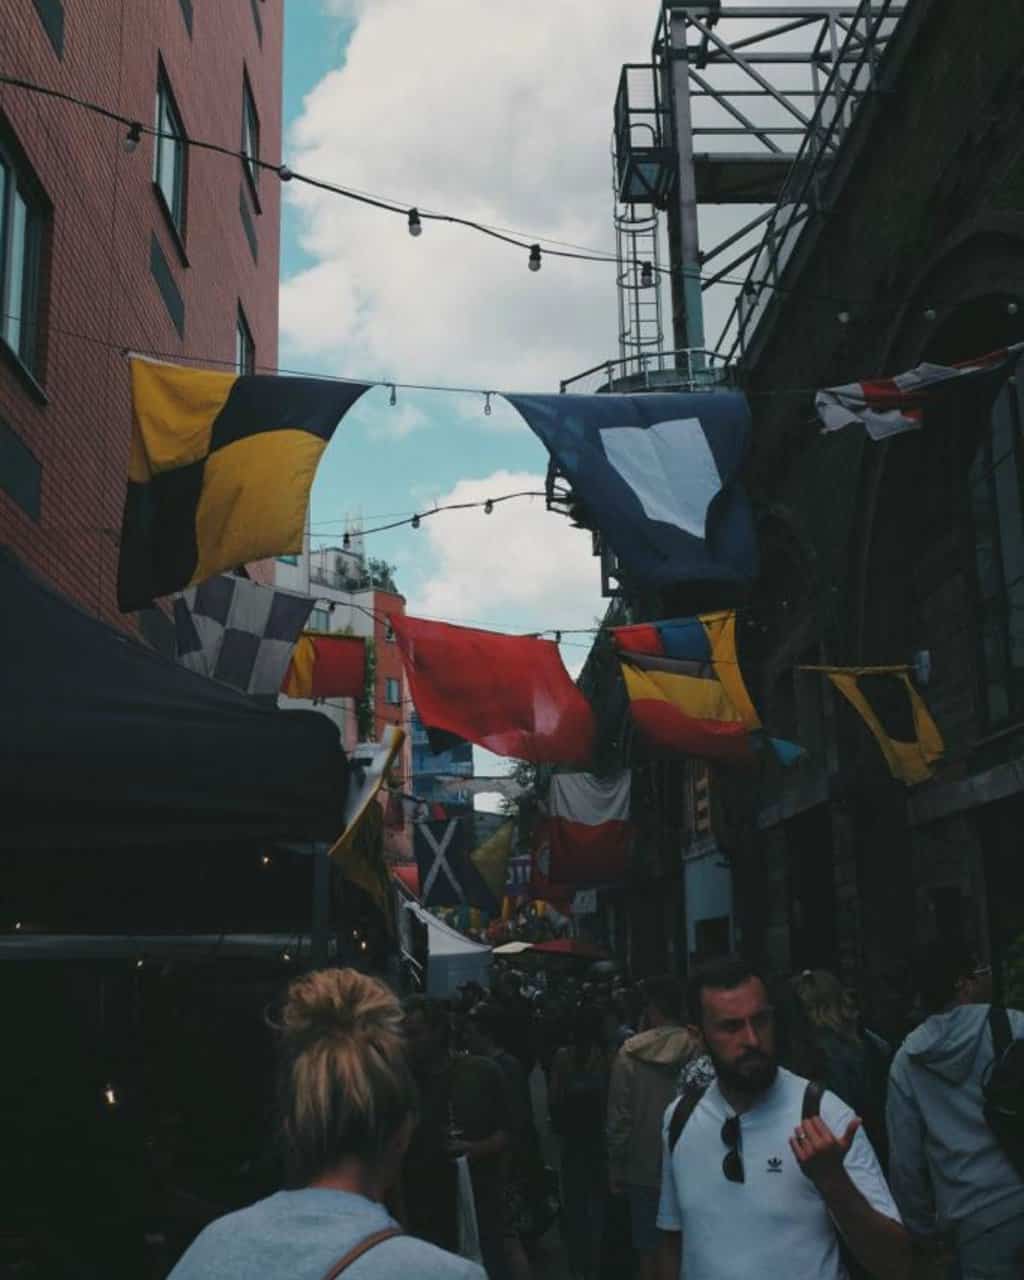 Crowded marketplace with flags at Maltby Street Market in London, UK